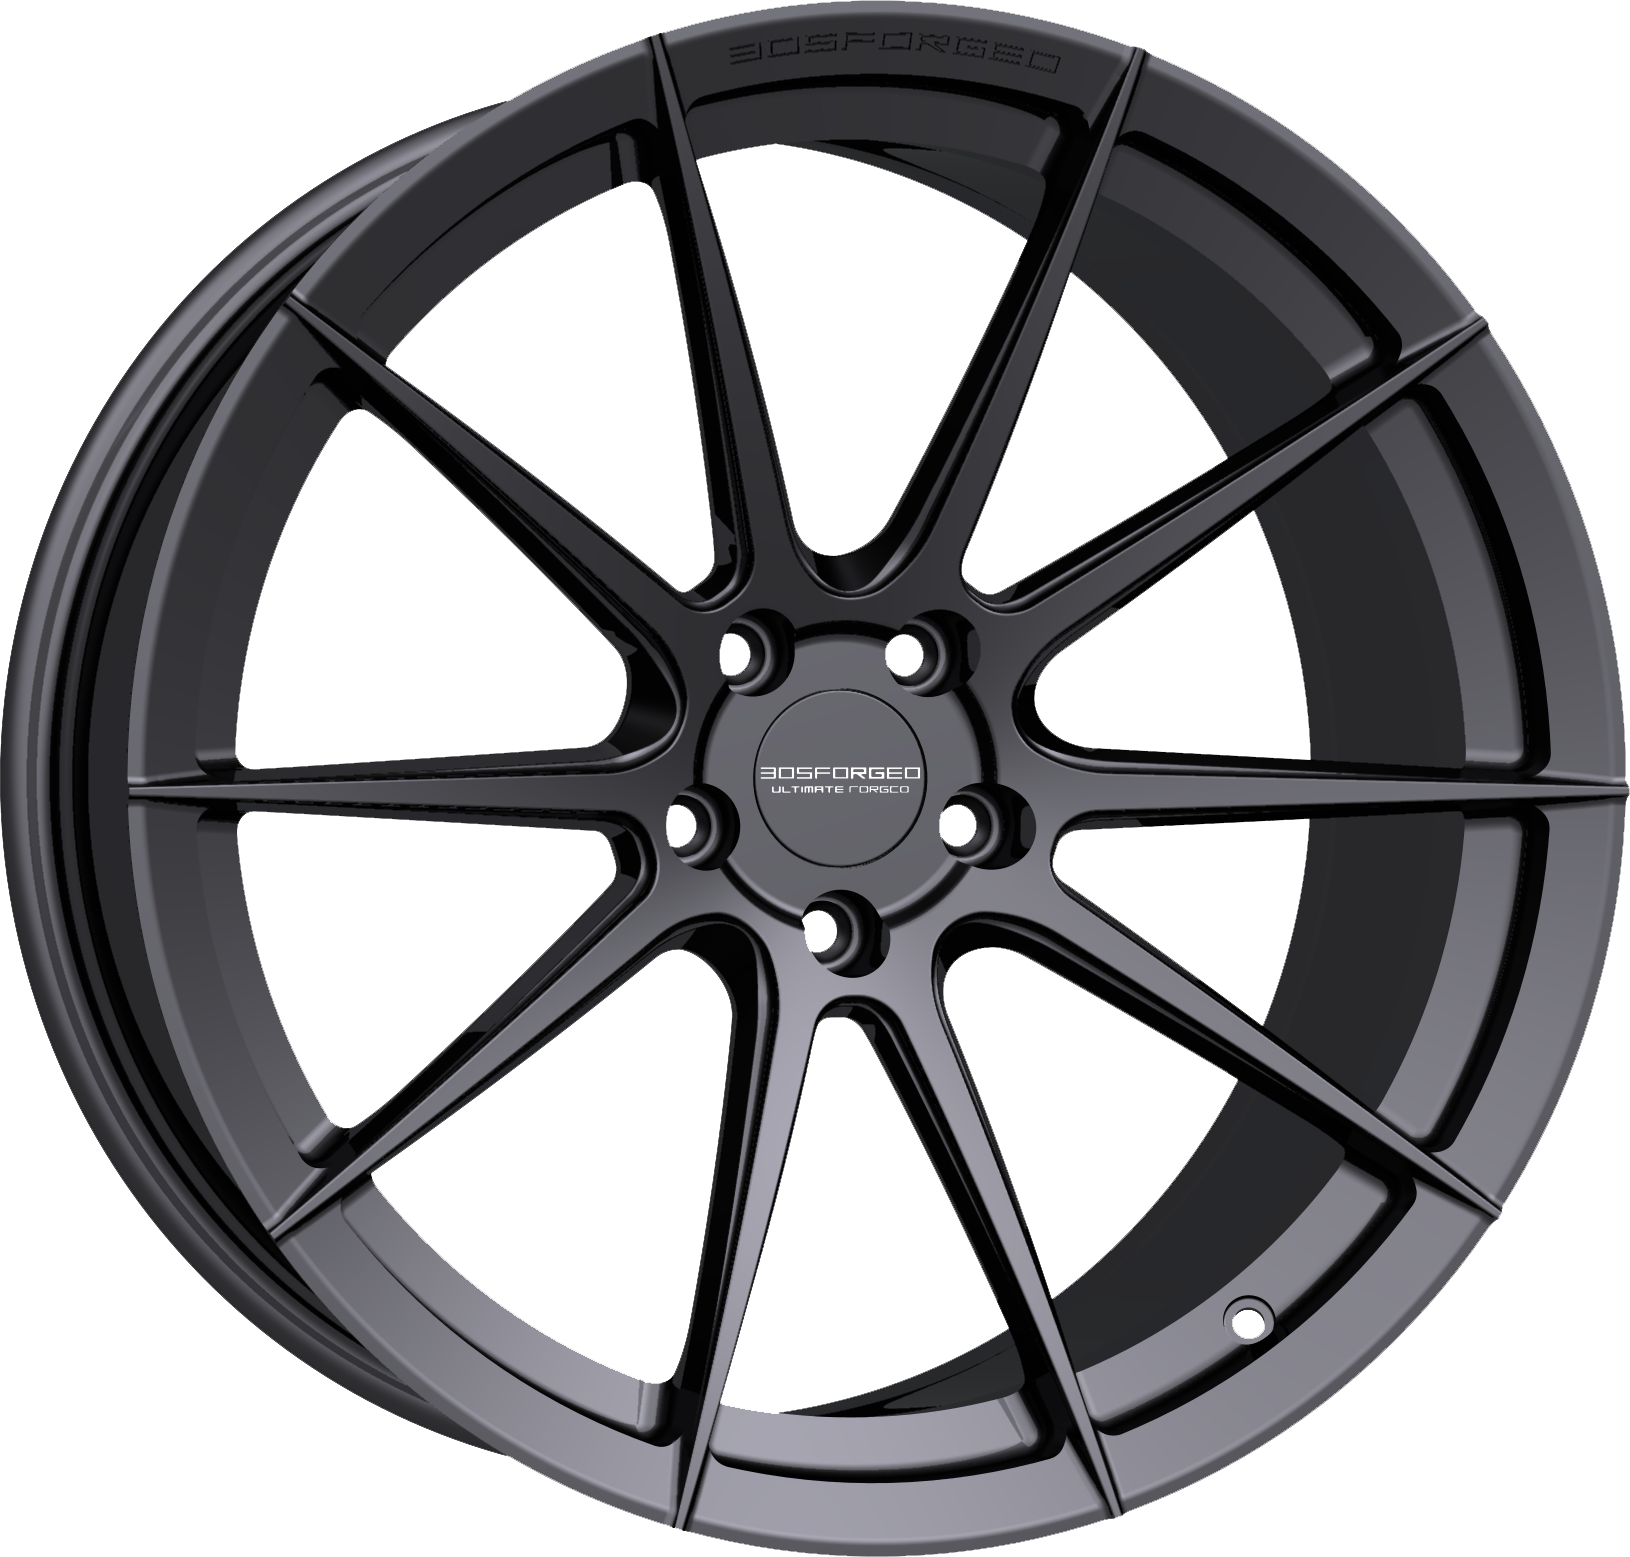 305 Forged UF135 forged wheels